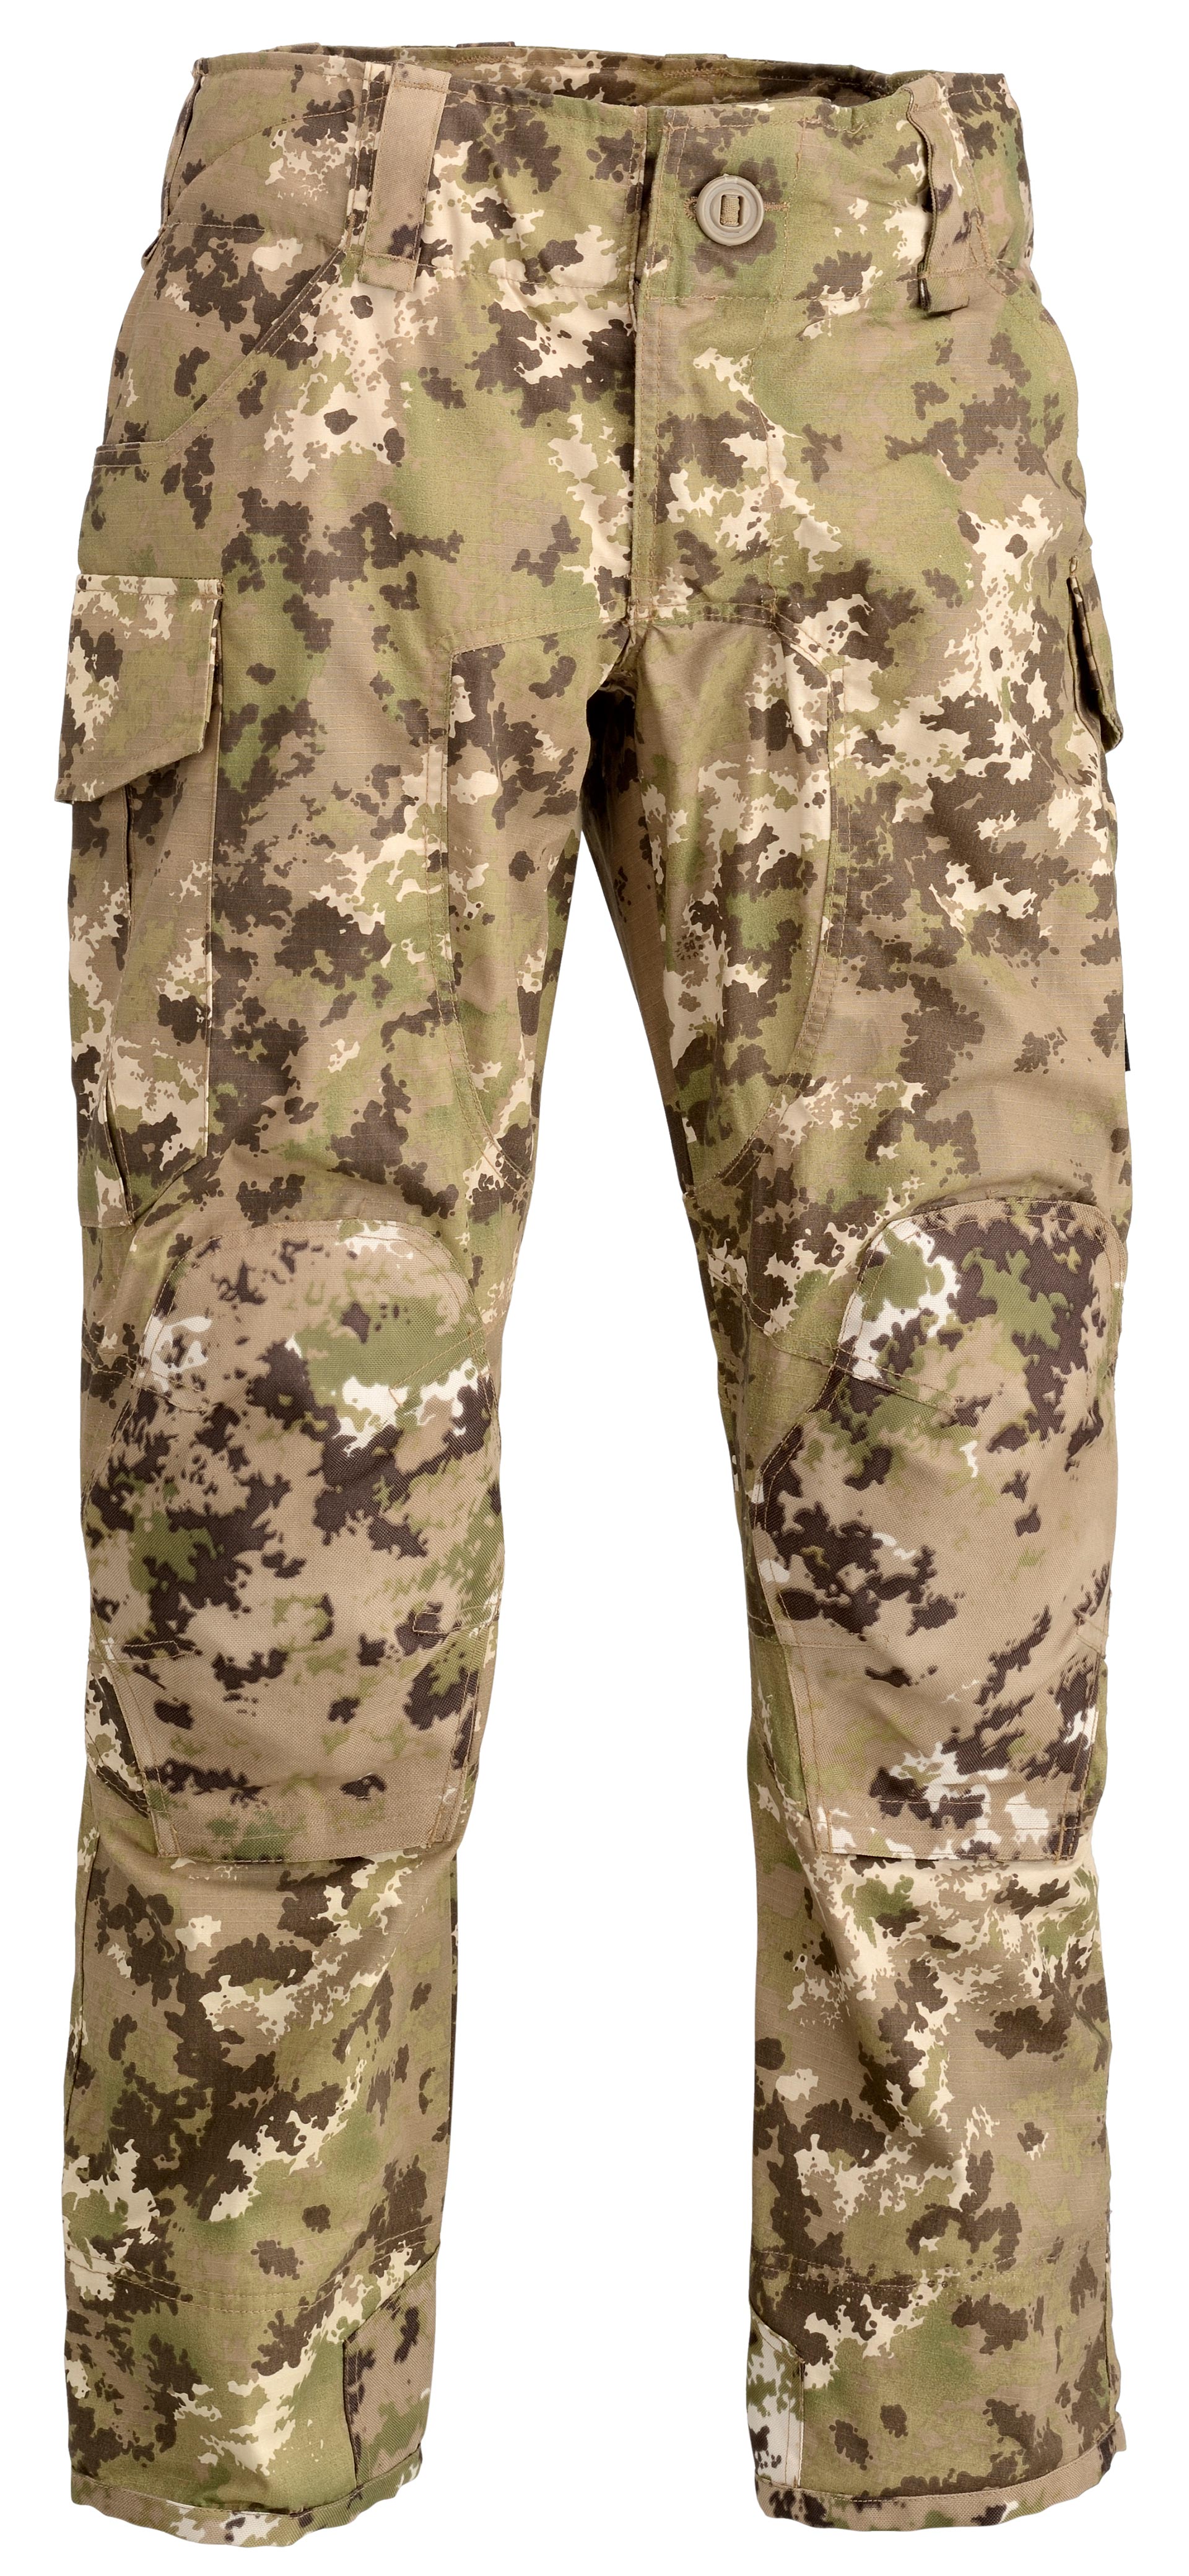 DEFCON 5 ADVANCED TACTICAL PANTS WITH INCLUDED SOFT KNEE PADS - D5-3171 -  Discontinued - Defcon 5 Italy